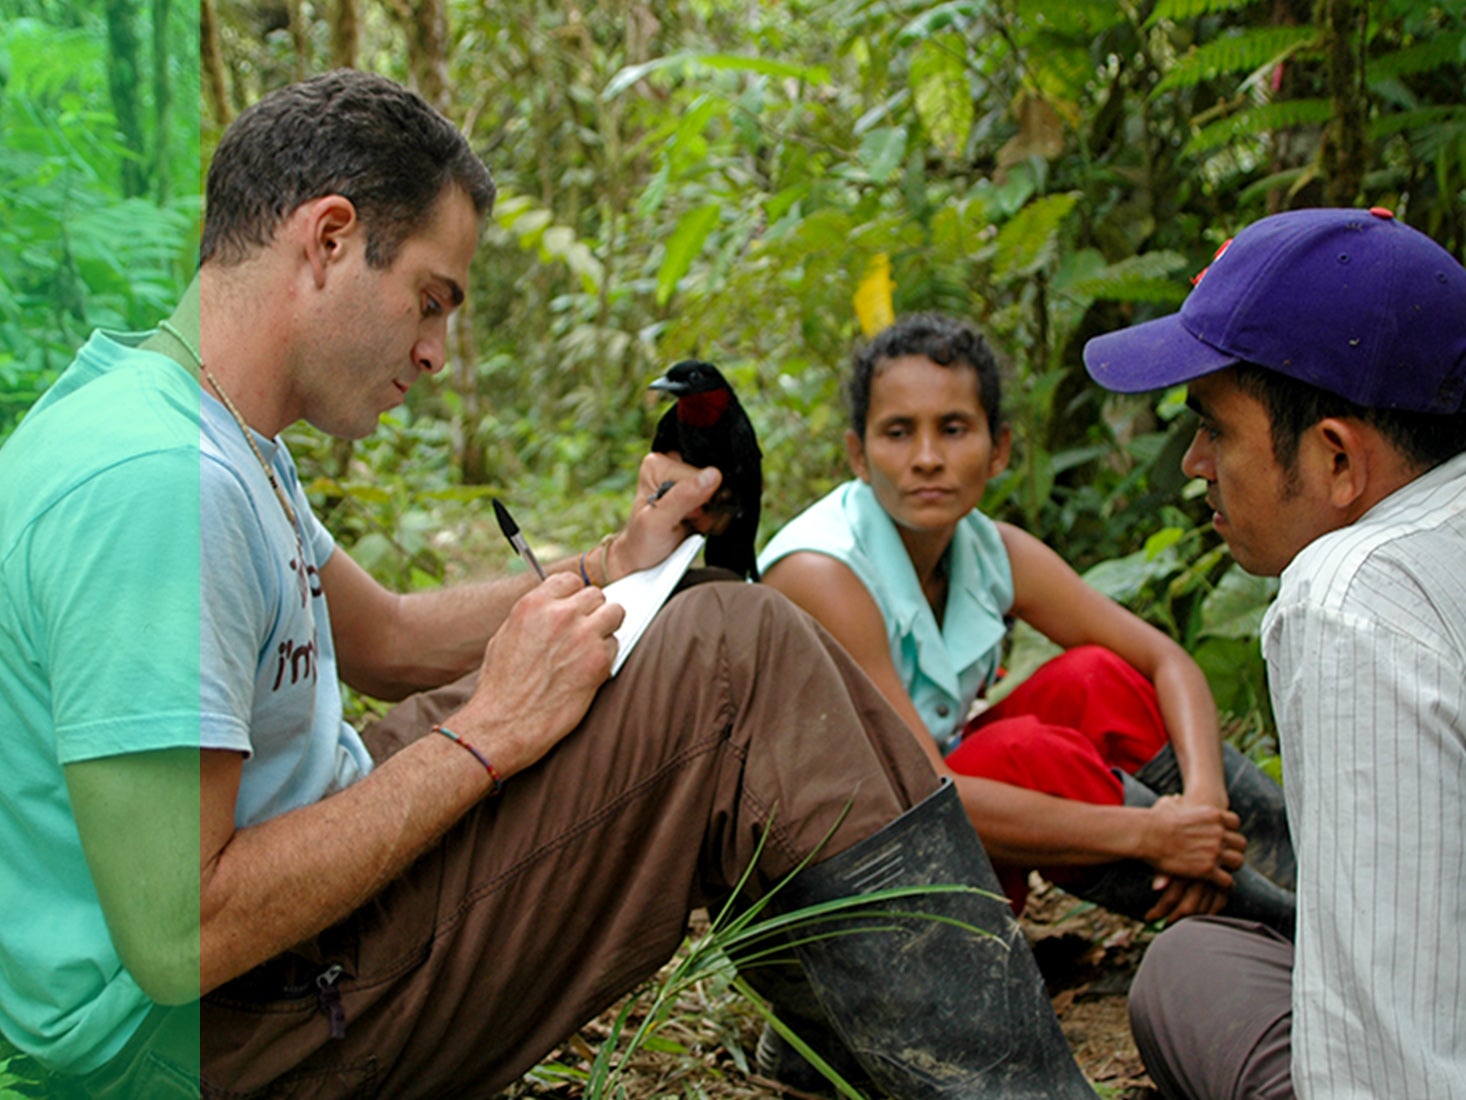 A student holding a bird takes notes while sitting in a rainforest with two others.